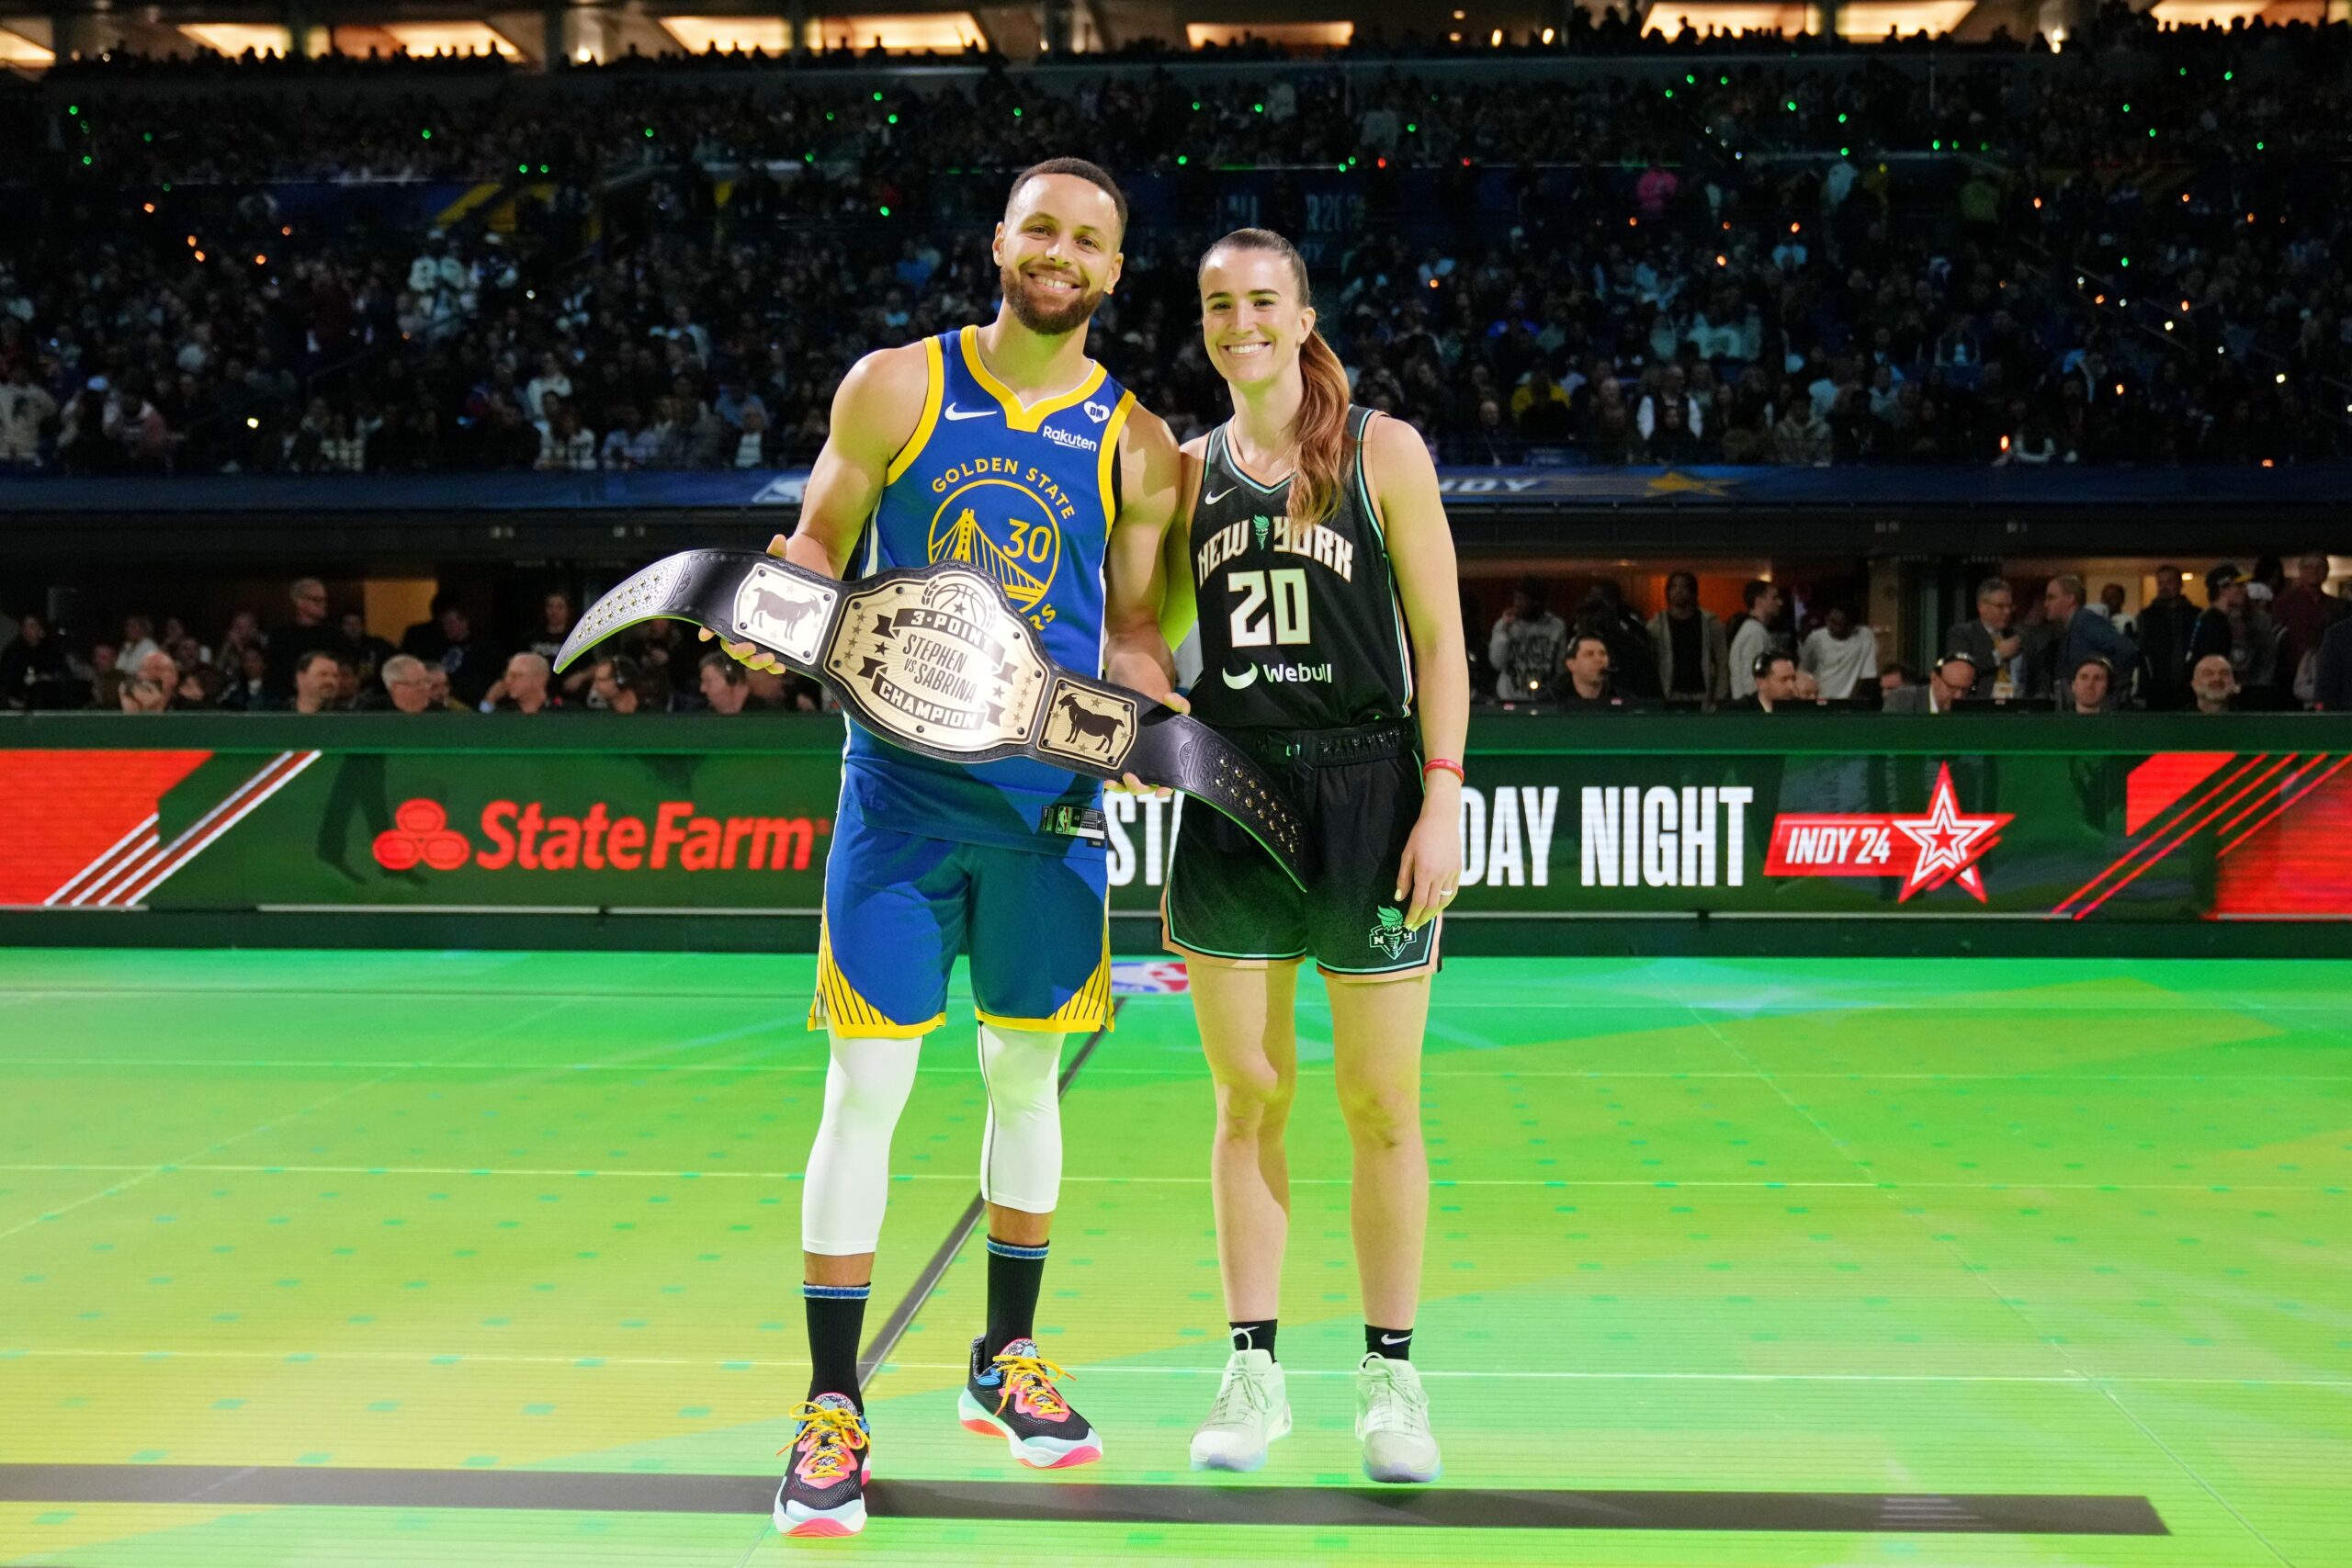 Feb 17, 2024; Indianapolis, IN, USA; Golden State Warriors guard Stephen Curry (30) and New York Liberty guard Sabrina Ionescu (20) after the Stephen vs Sebrina three-point challenge during NBA All Star Saturday Night at Lucas Oil Stadium. Mandatory Credit: Kyle Terada-USA TODAY Sports